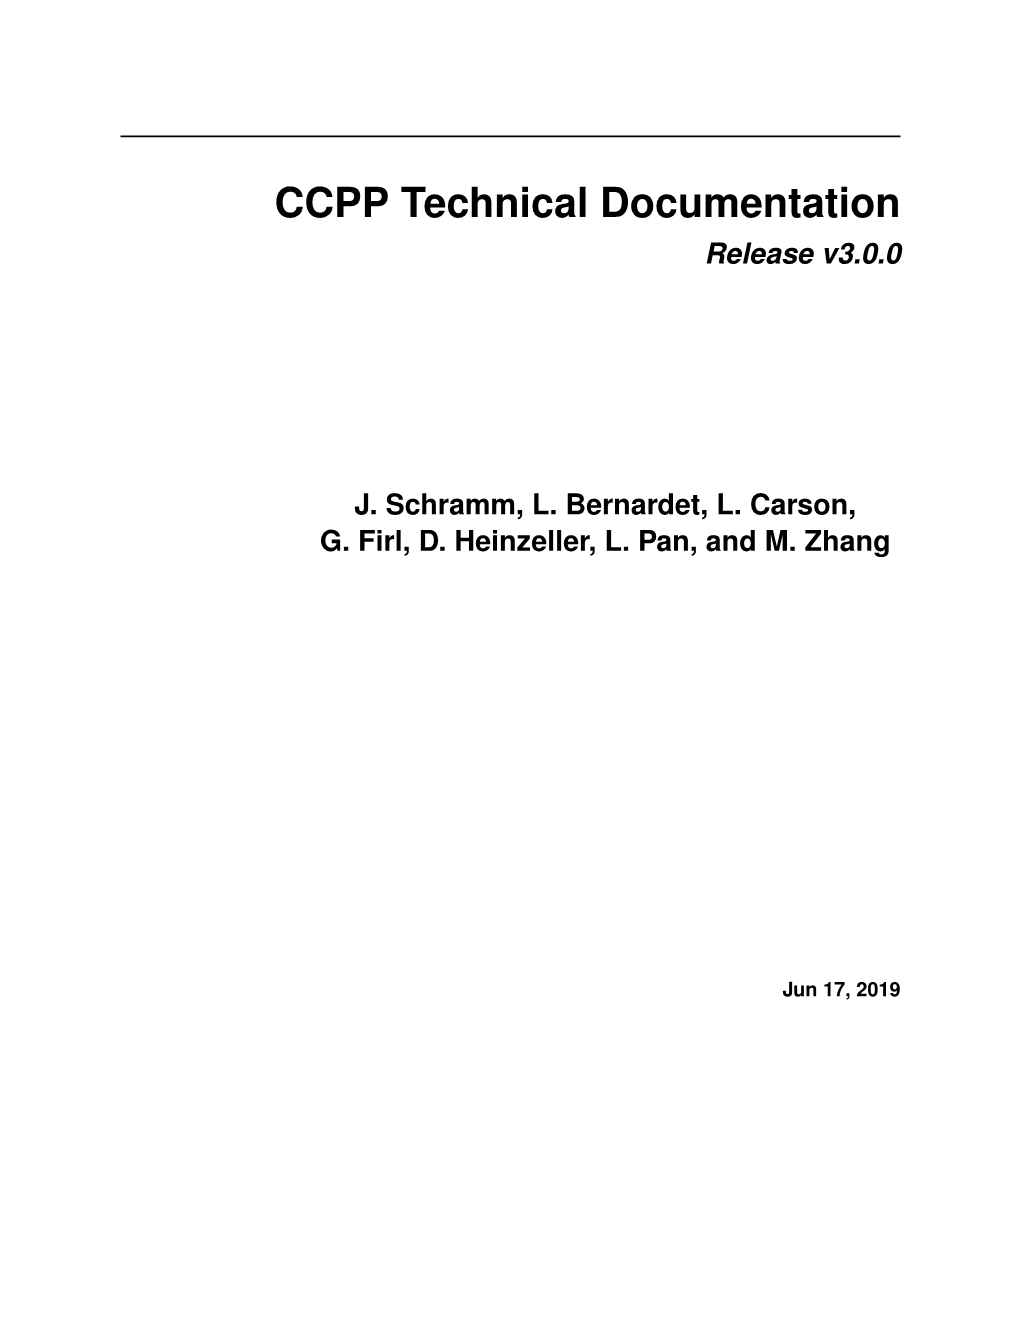 CCPP Technical Documentation Release V3.0.0